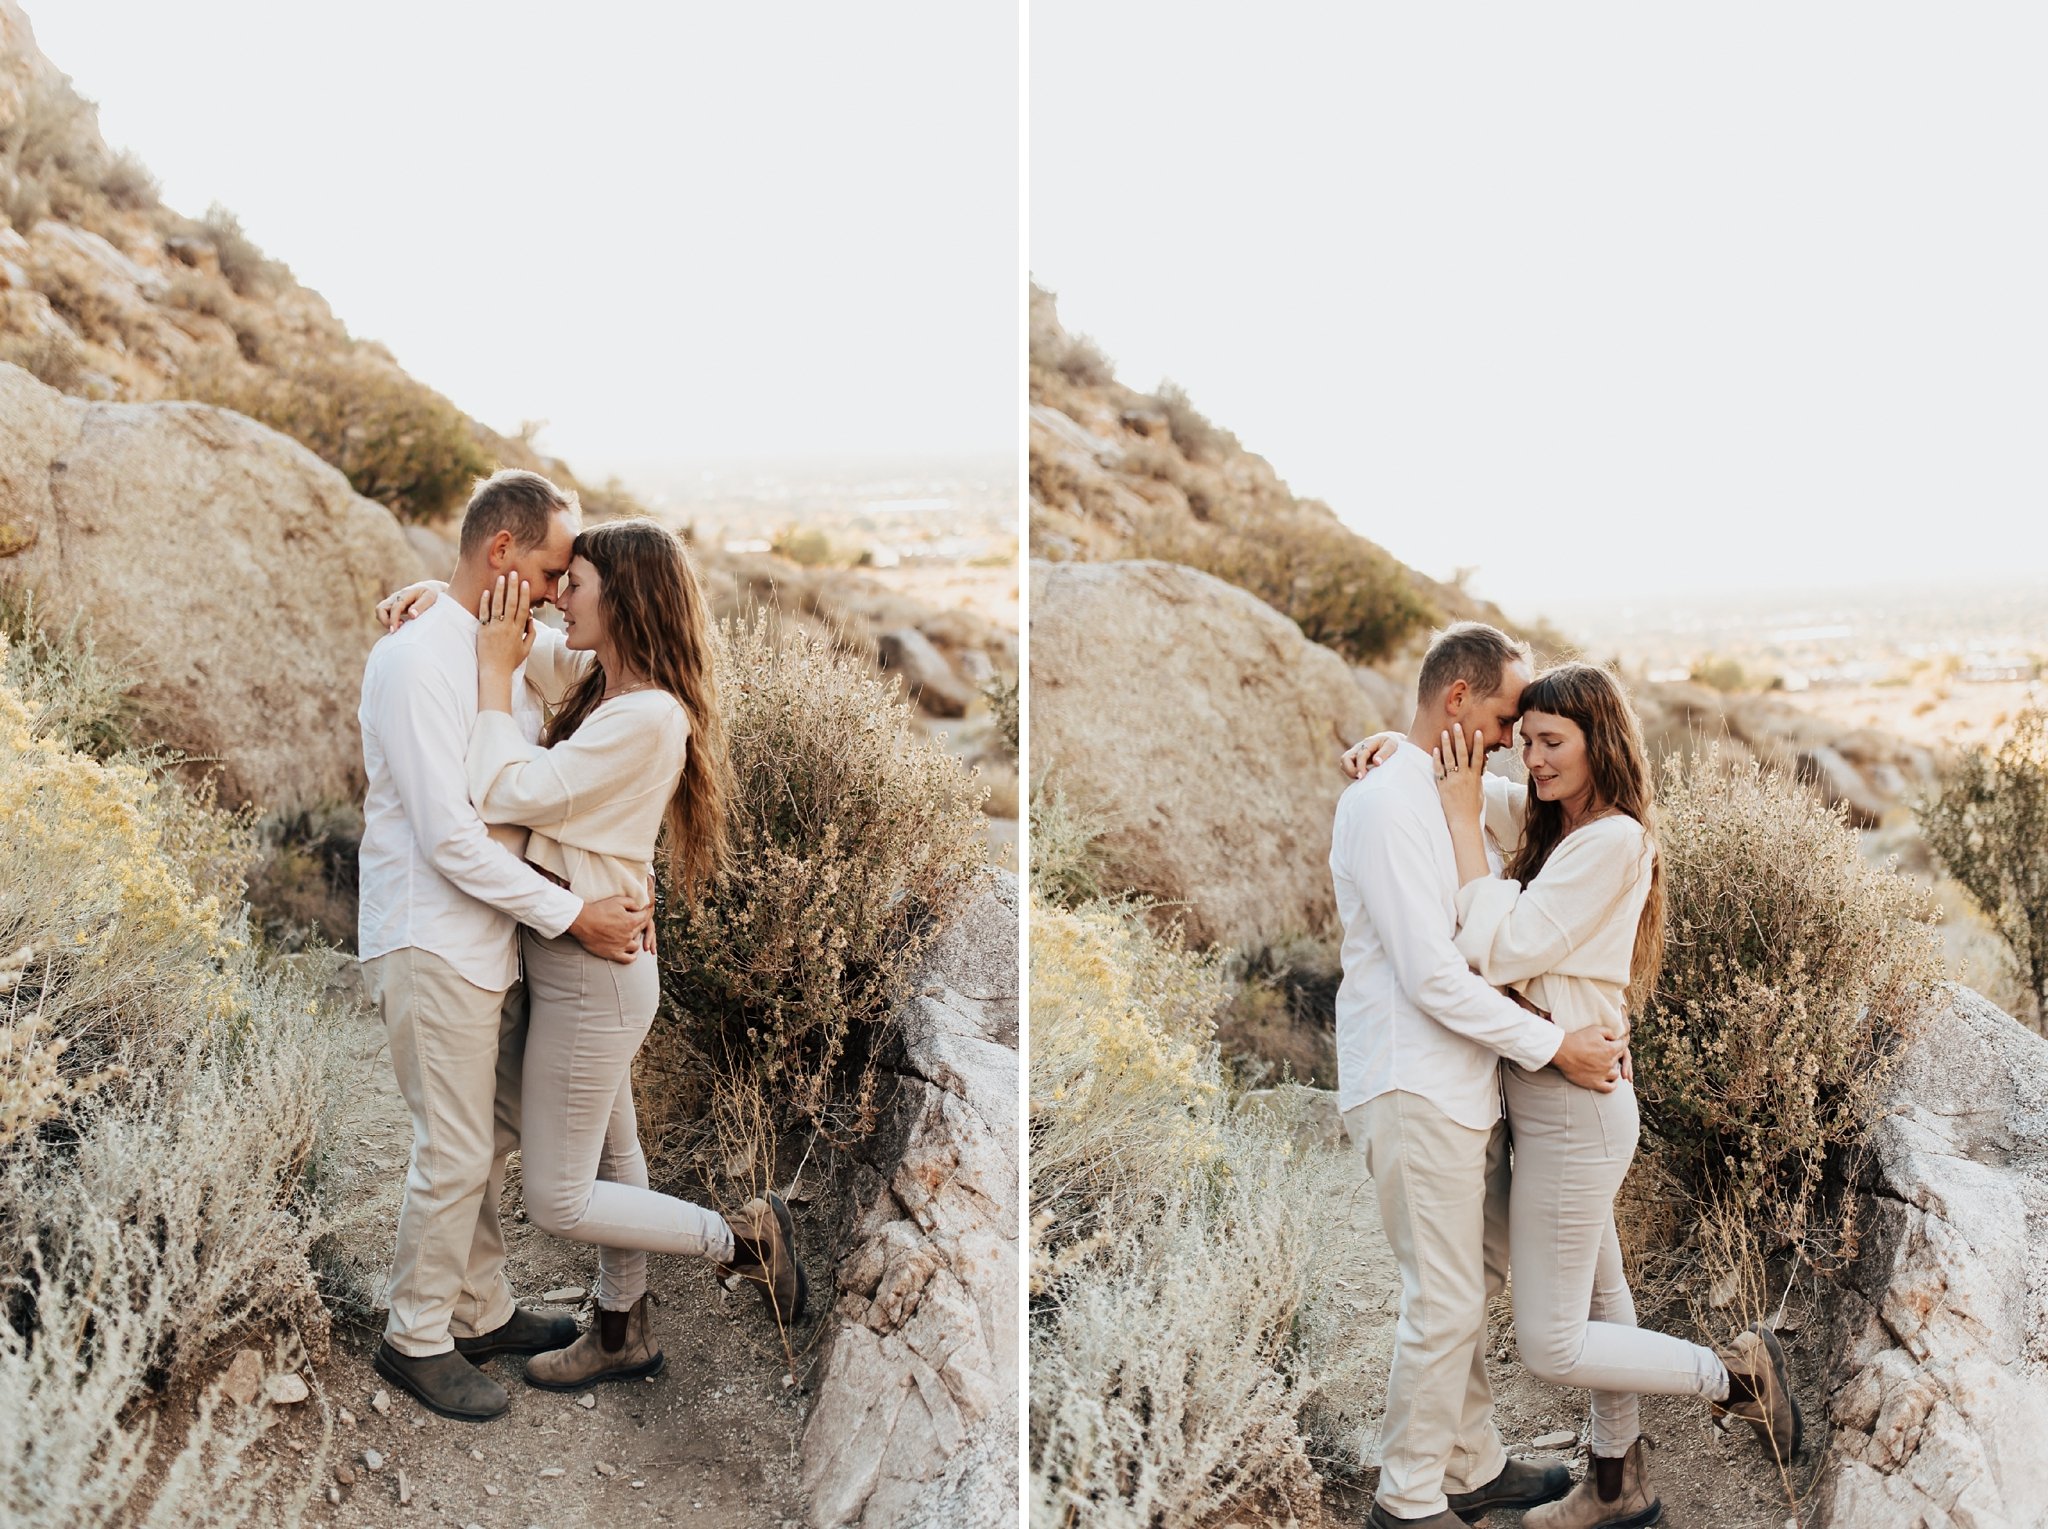 Alicia+lucia+photography+-+albuquerque+wedding+photographer+-+santa+fe+wedding+photography+-+new+mexico+wedding+photographer+-+new+mexico+wedding+-+desert+engagement+-+foothills+engagement+-+mountain+engagement_0013.jpg